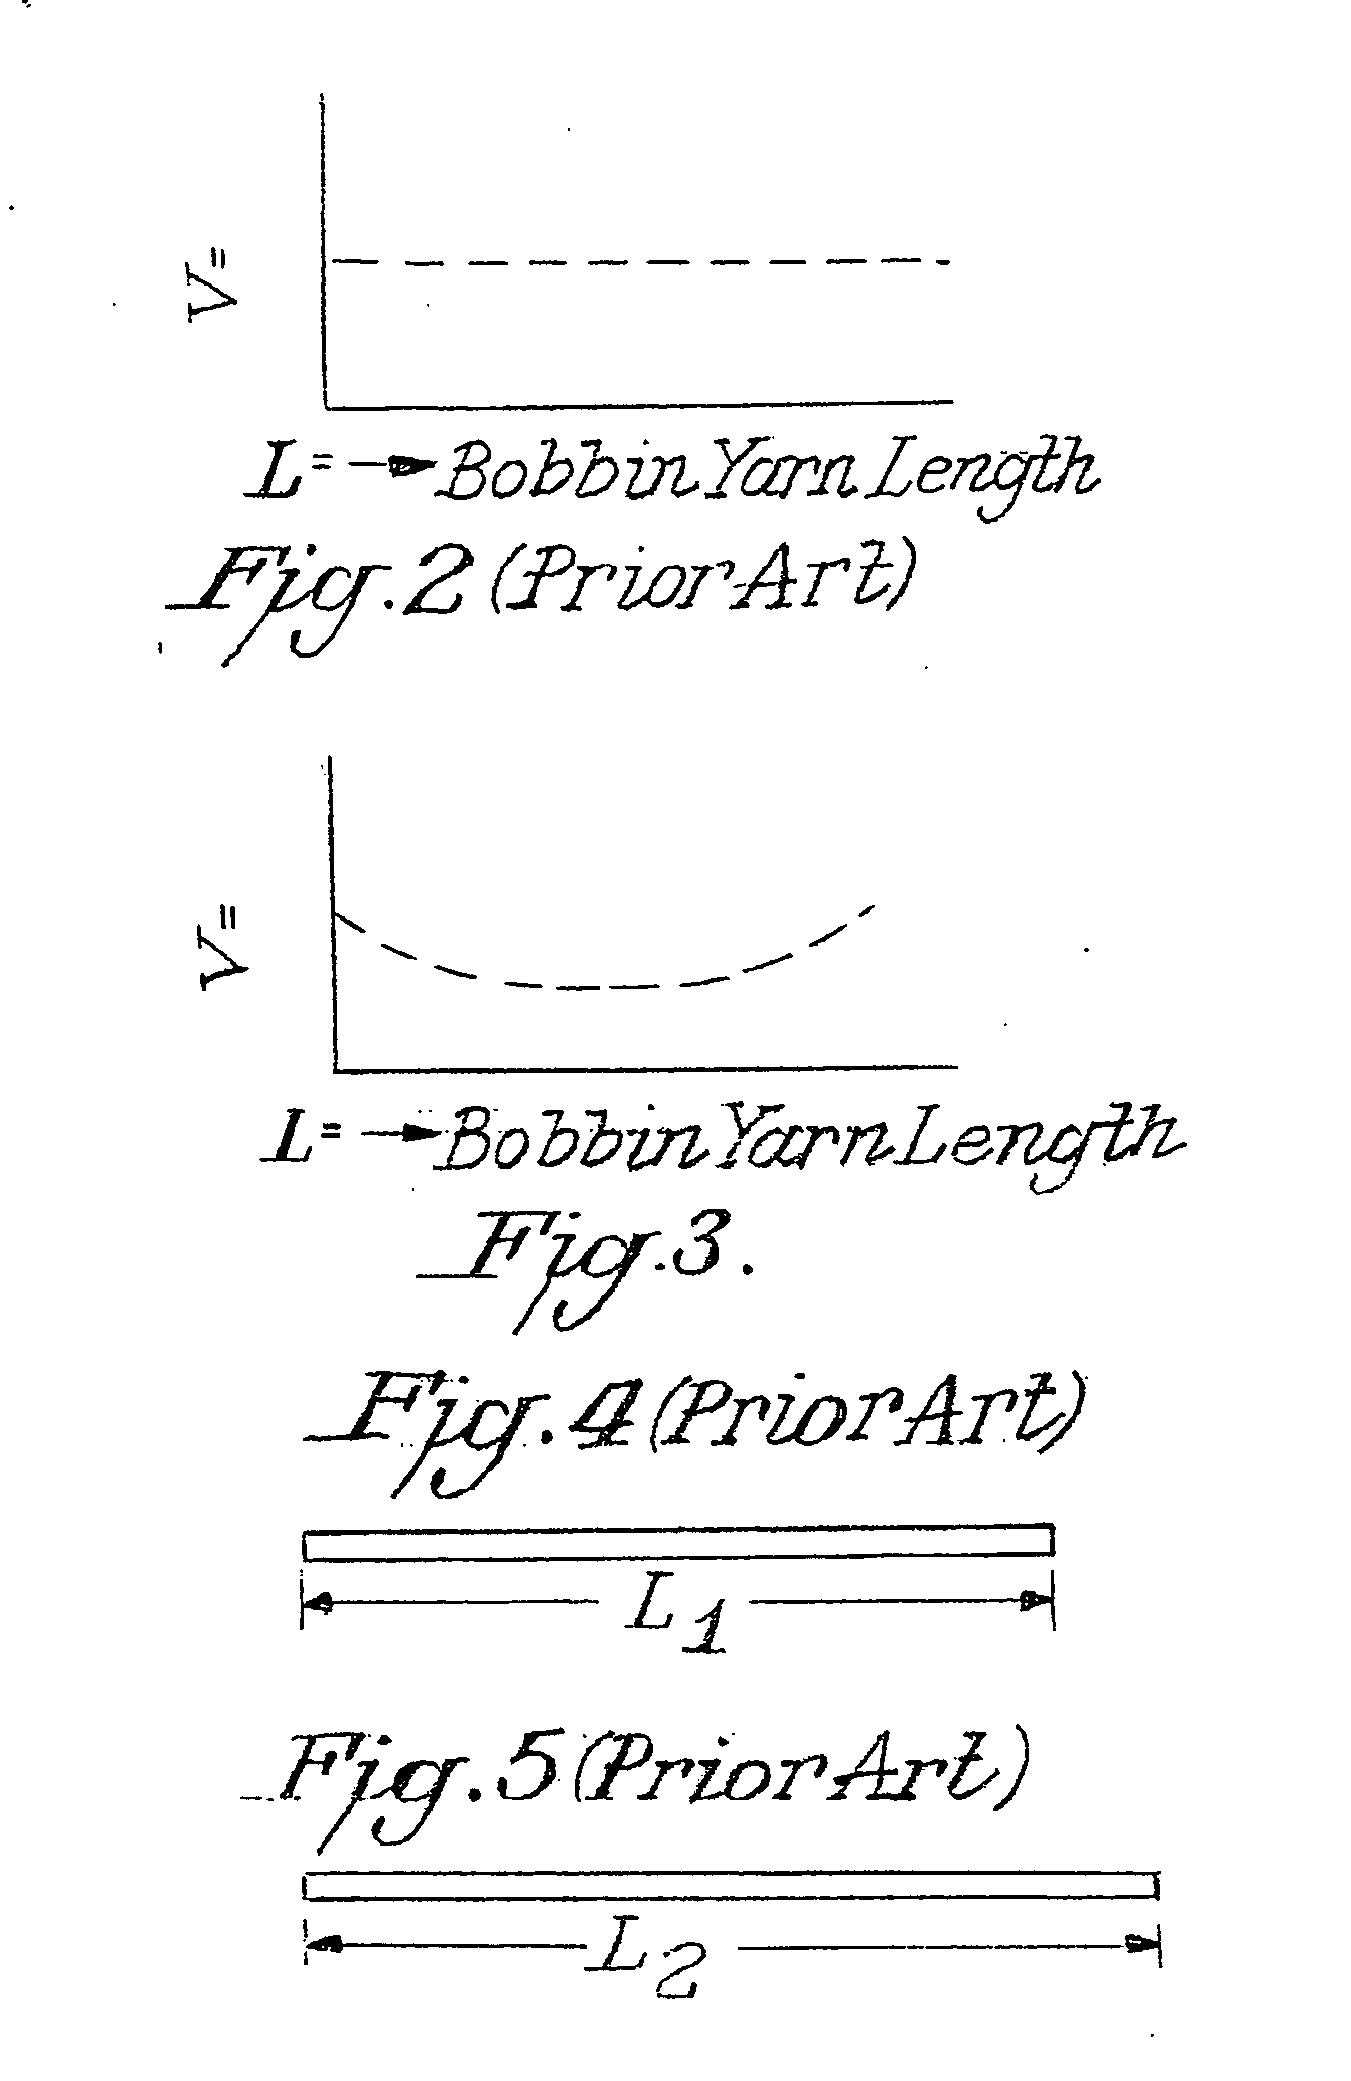 Method and apparatus for circular knitting with elastomeric yarn that compensate for yarn package relaxation